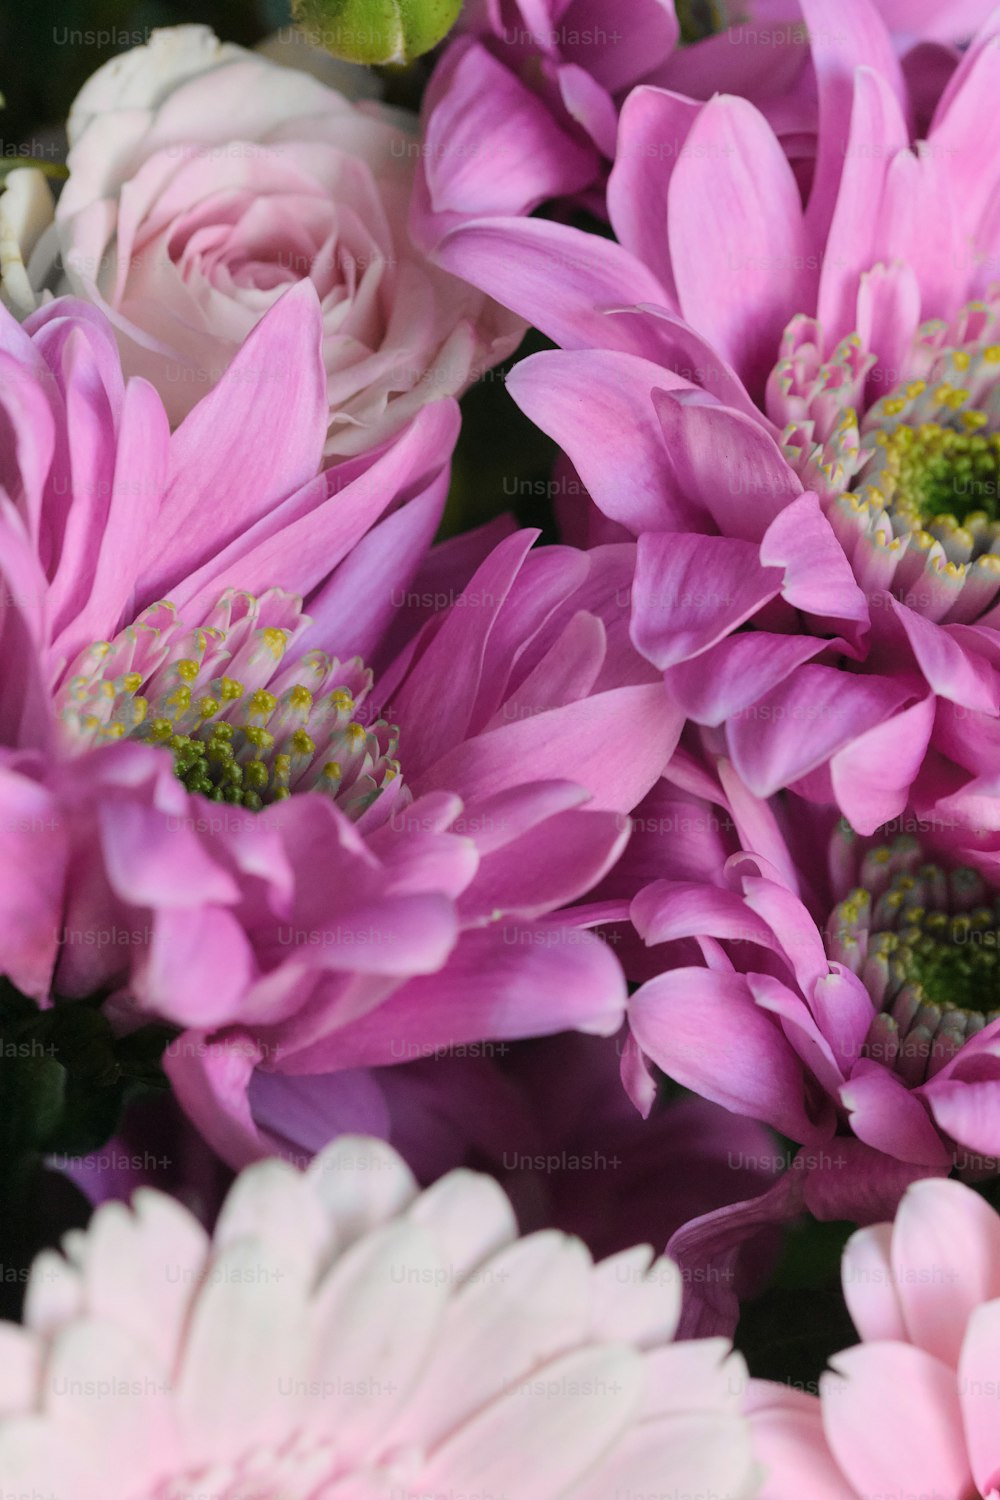 a bunch of pink and white flowers in a vase